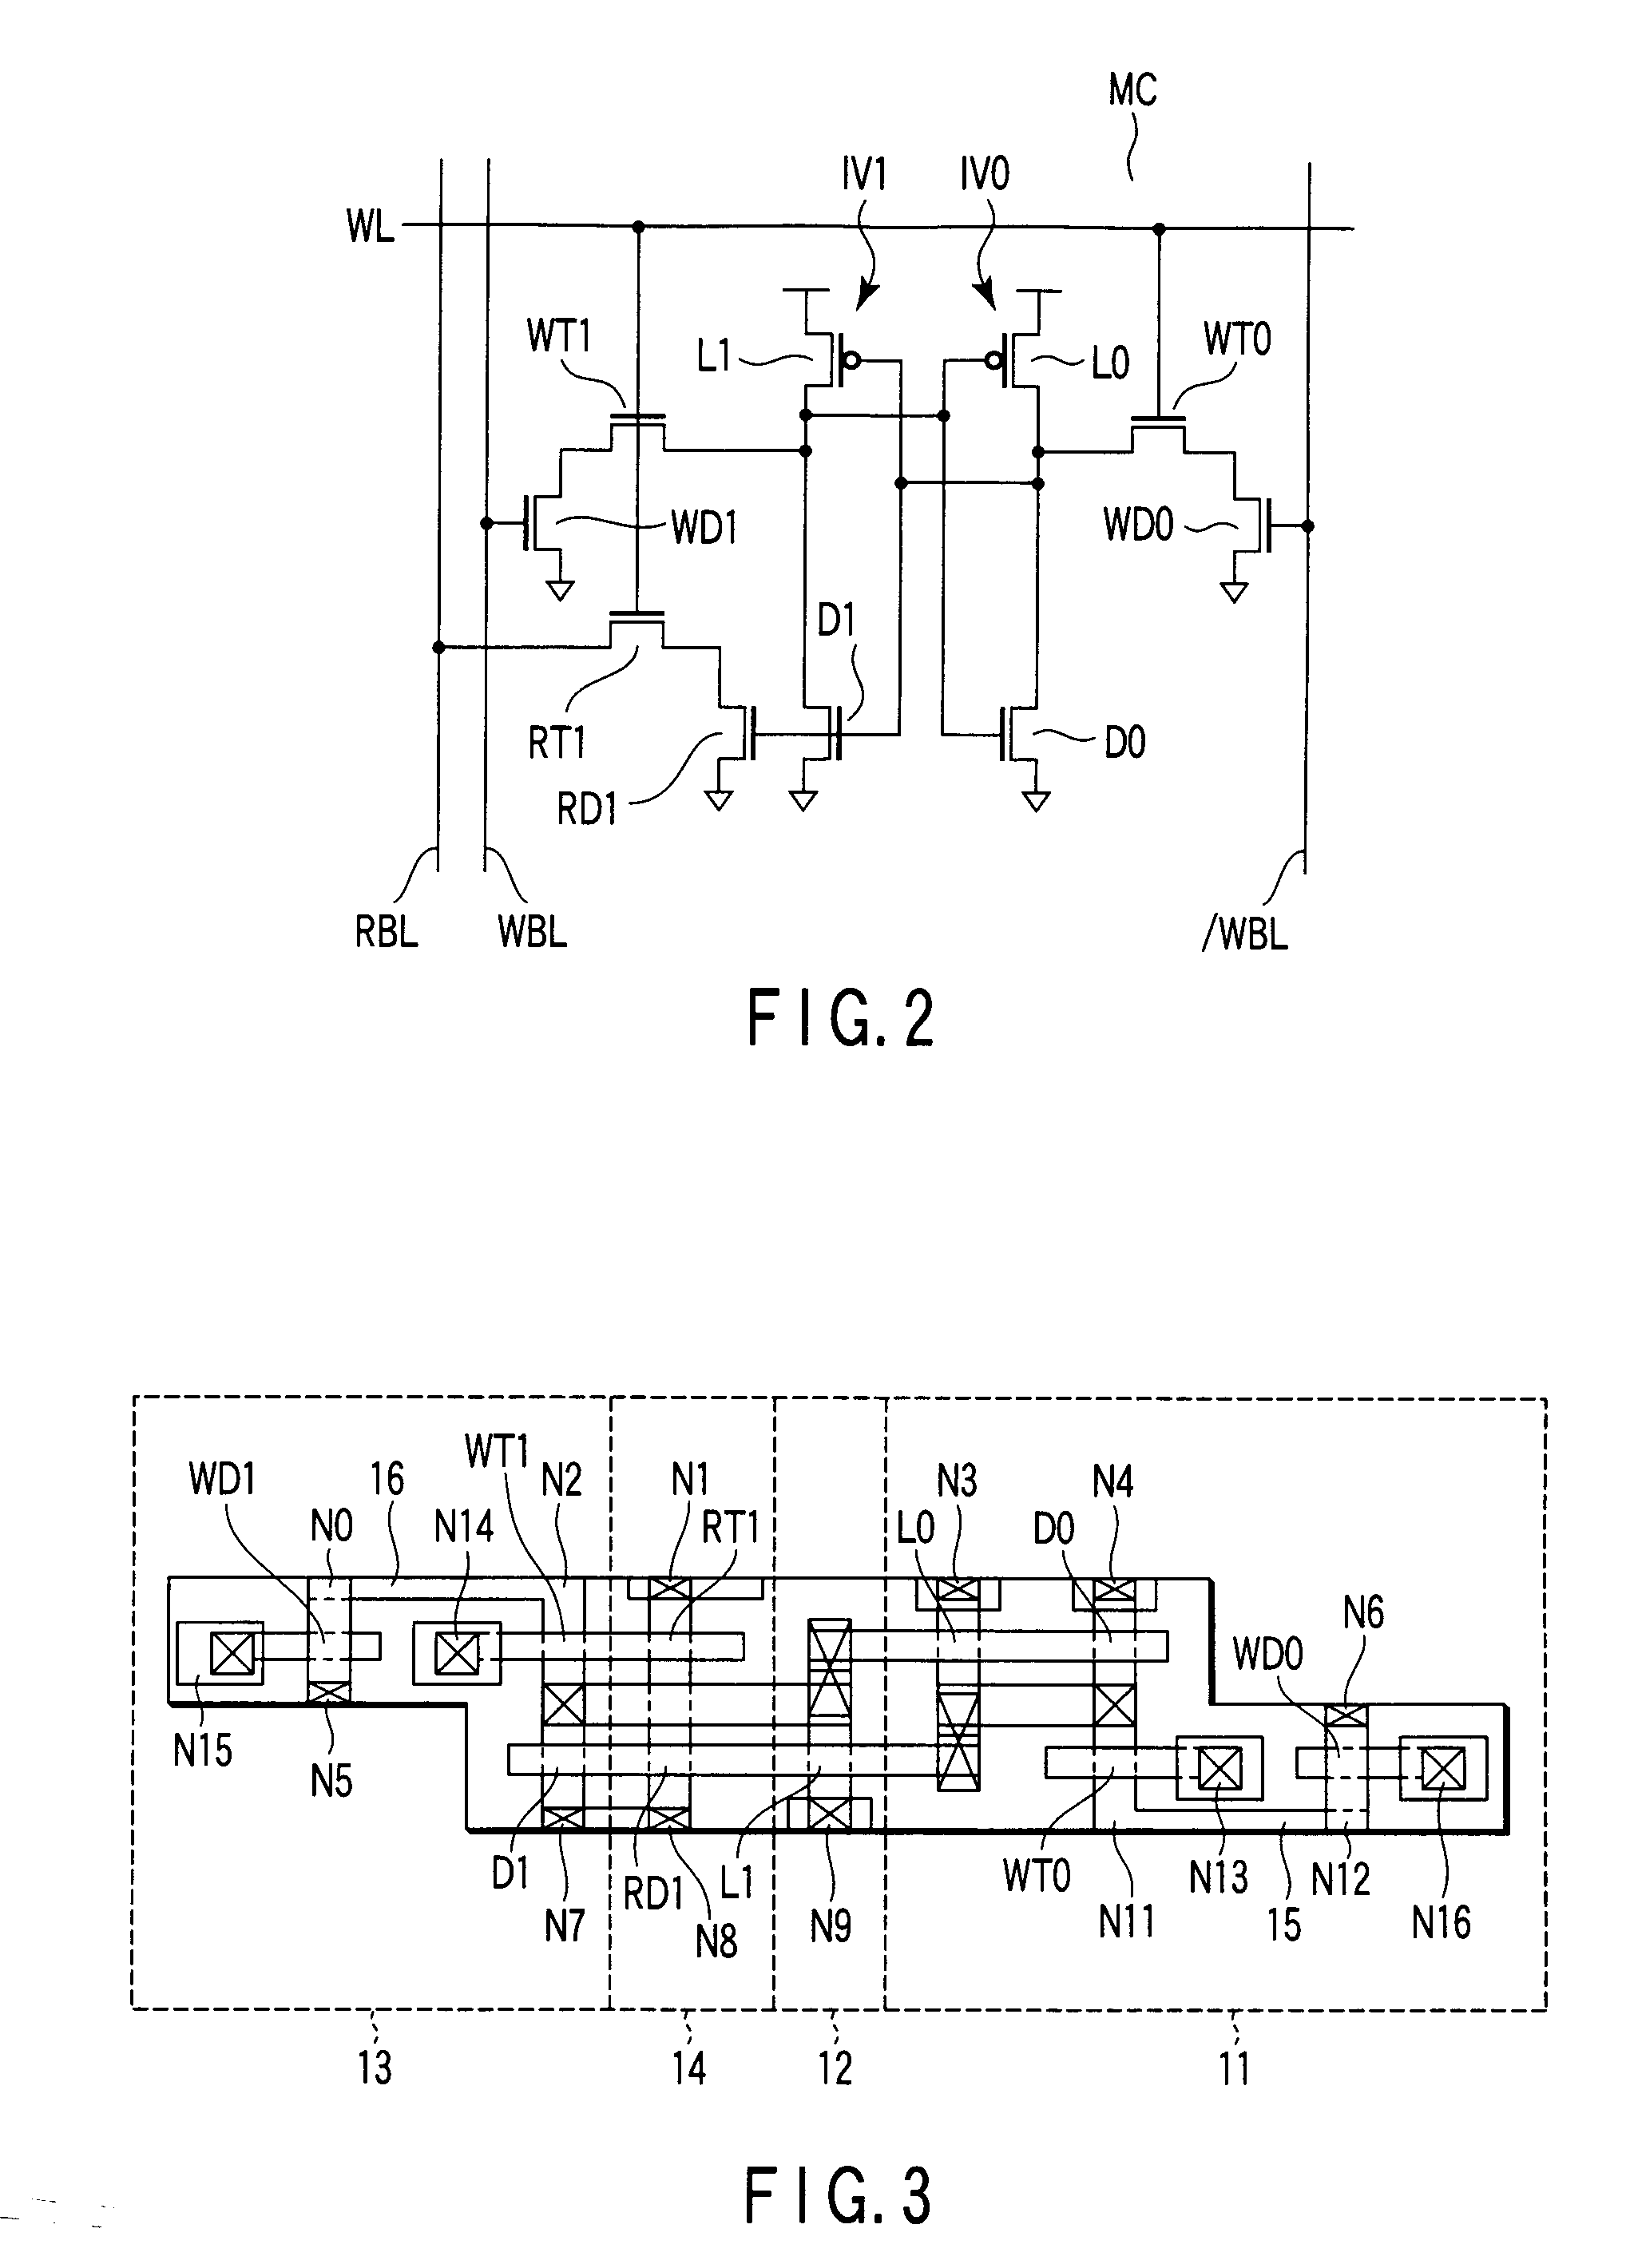 Semiconductor memory device where write and read disturbances have been improved